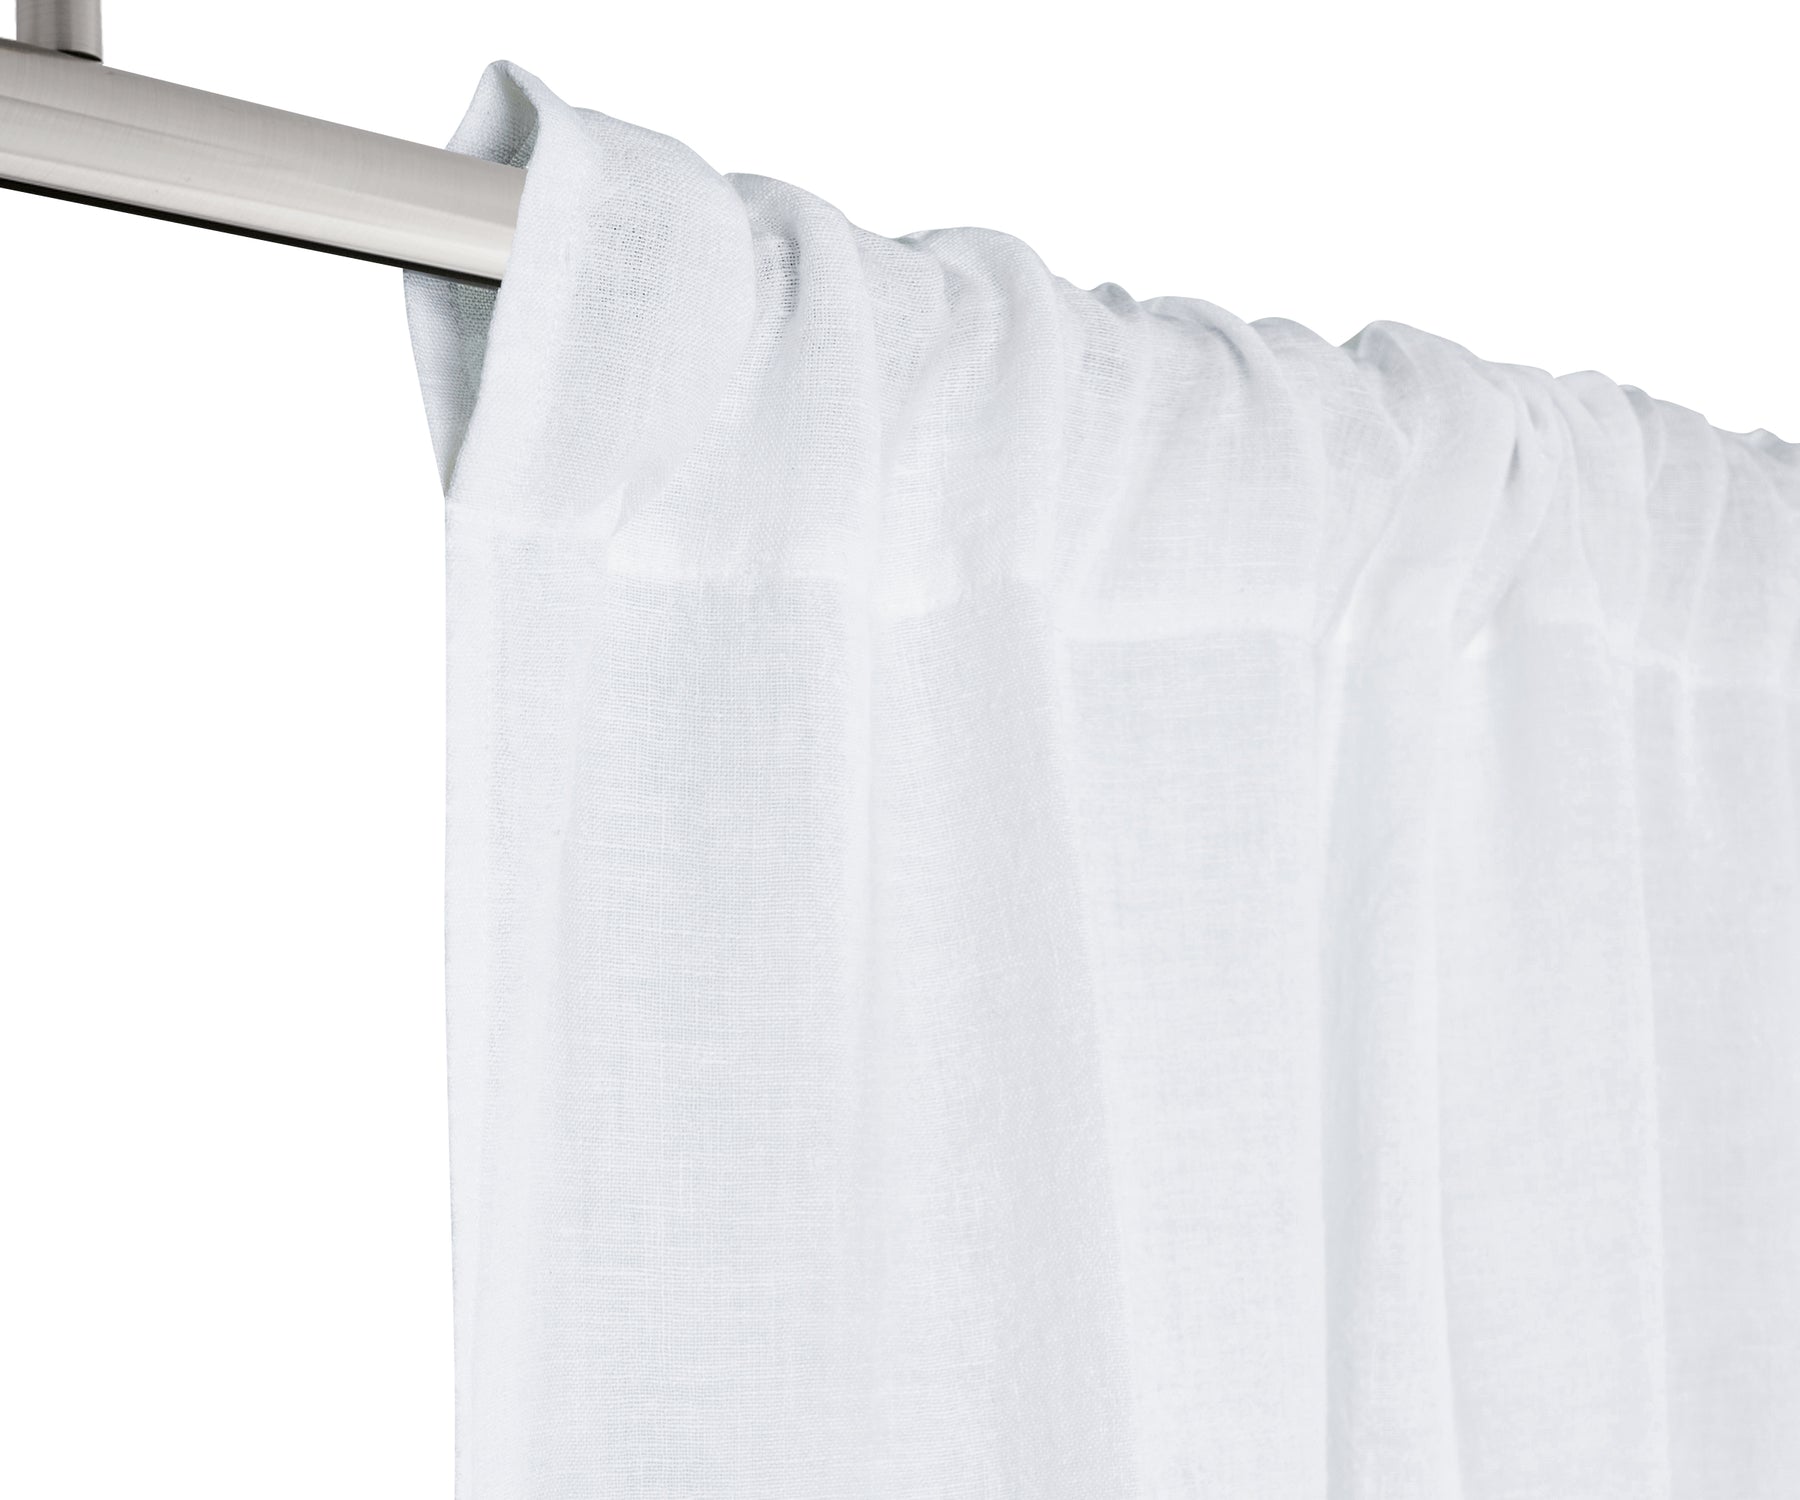 Practical bathroom curtains for privacy